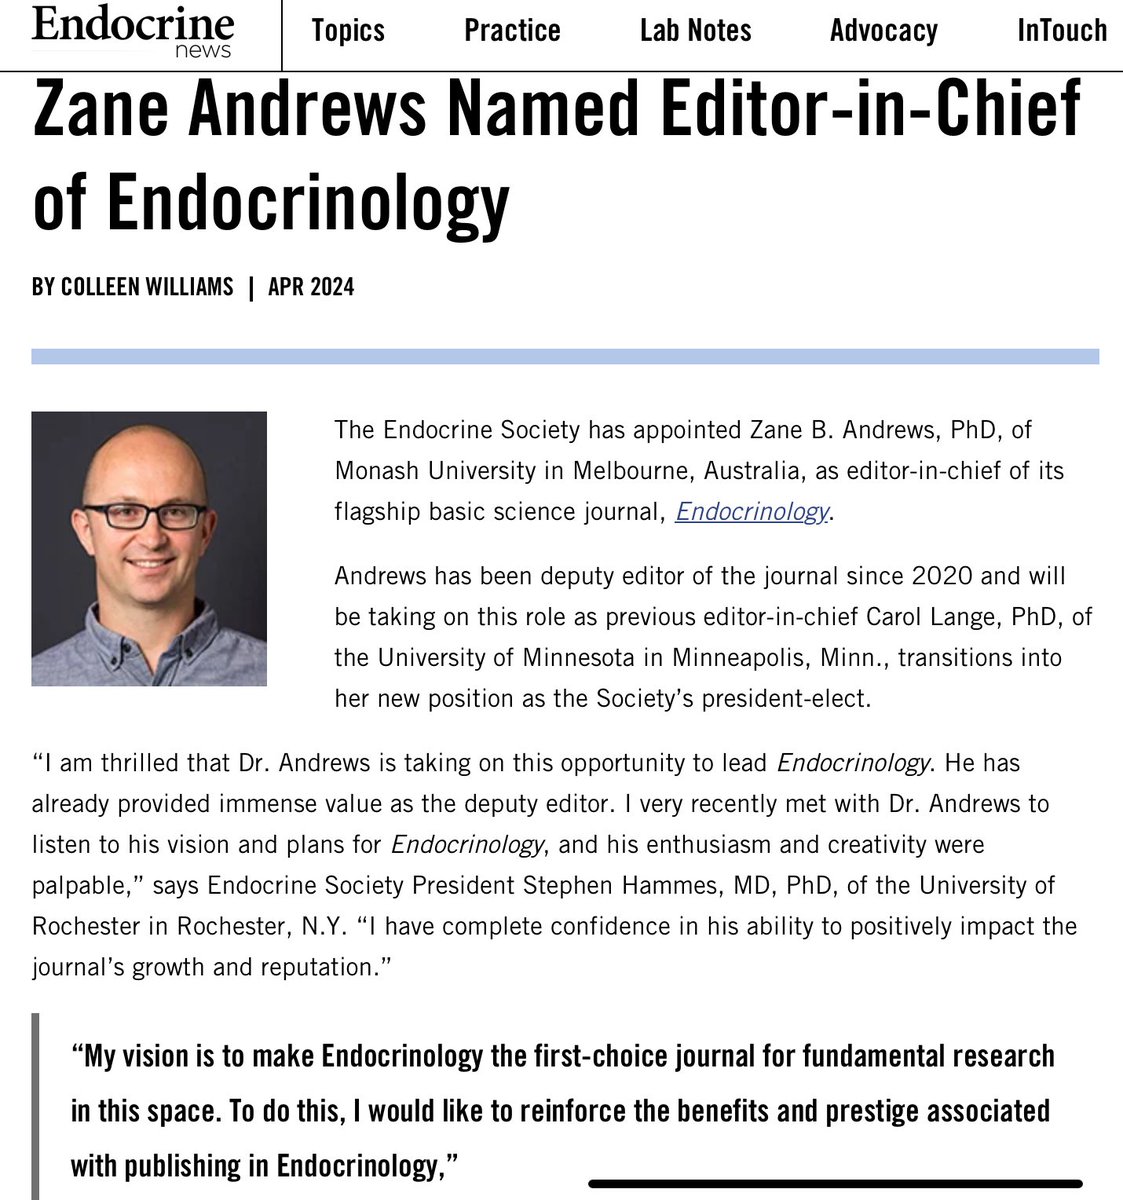 Congratulations Dr. Andrews! @zane_andrews1 Thank you to outgoing EIC and incoming @TheEndoSociety President Dr. Carol Lange. The Endocrine Society is fortunate to have such strong engagement from so many dedicated members